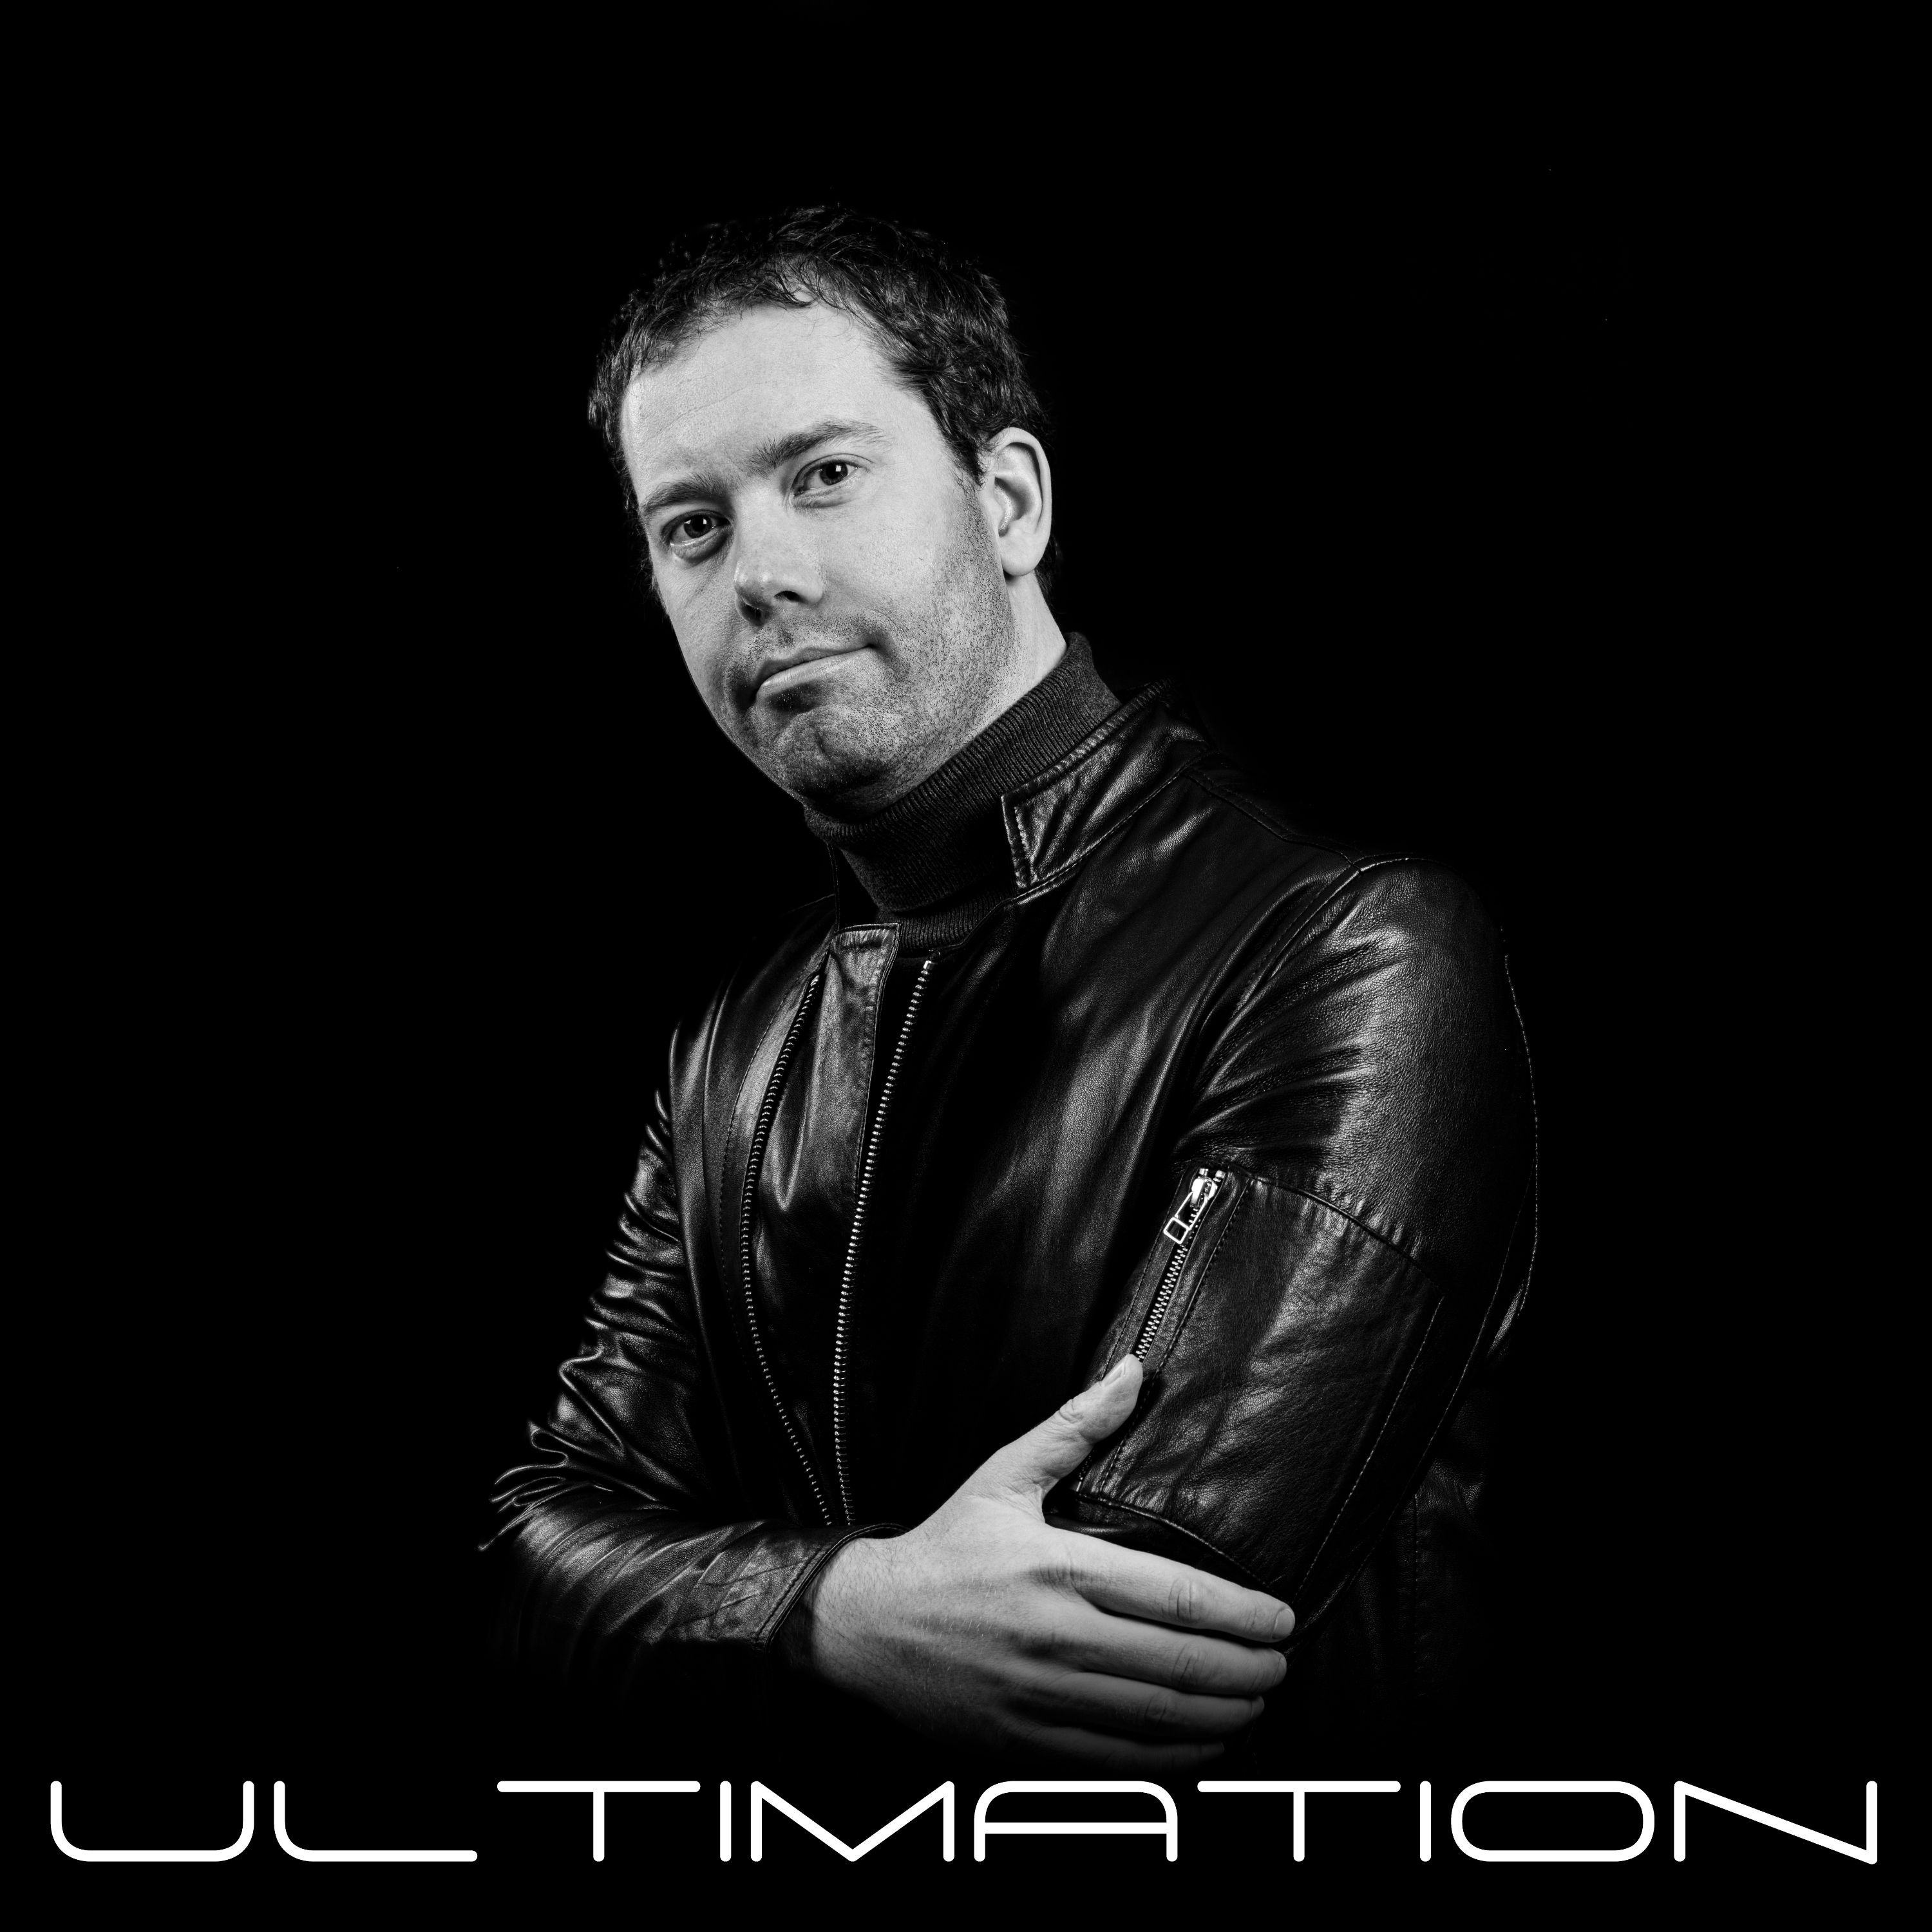 ULTIMATION